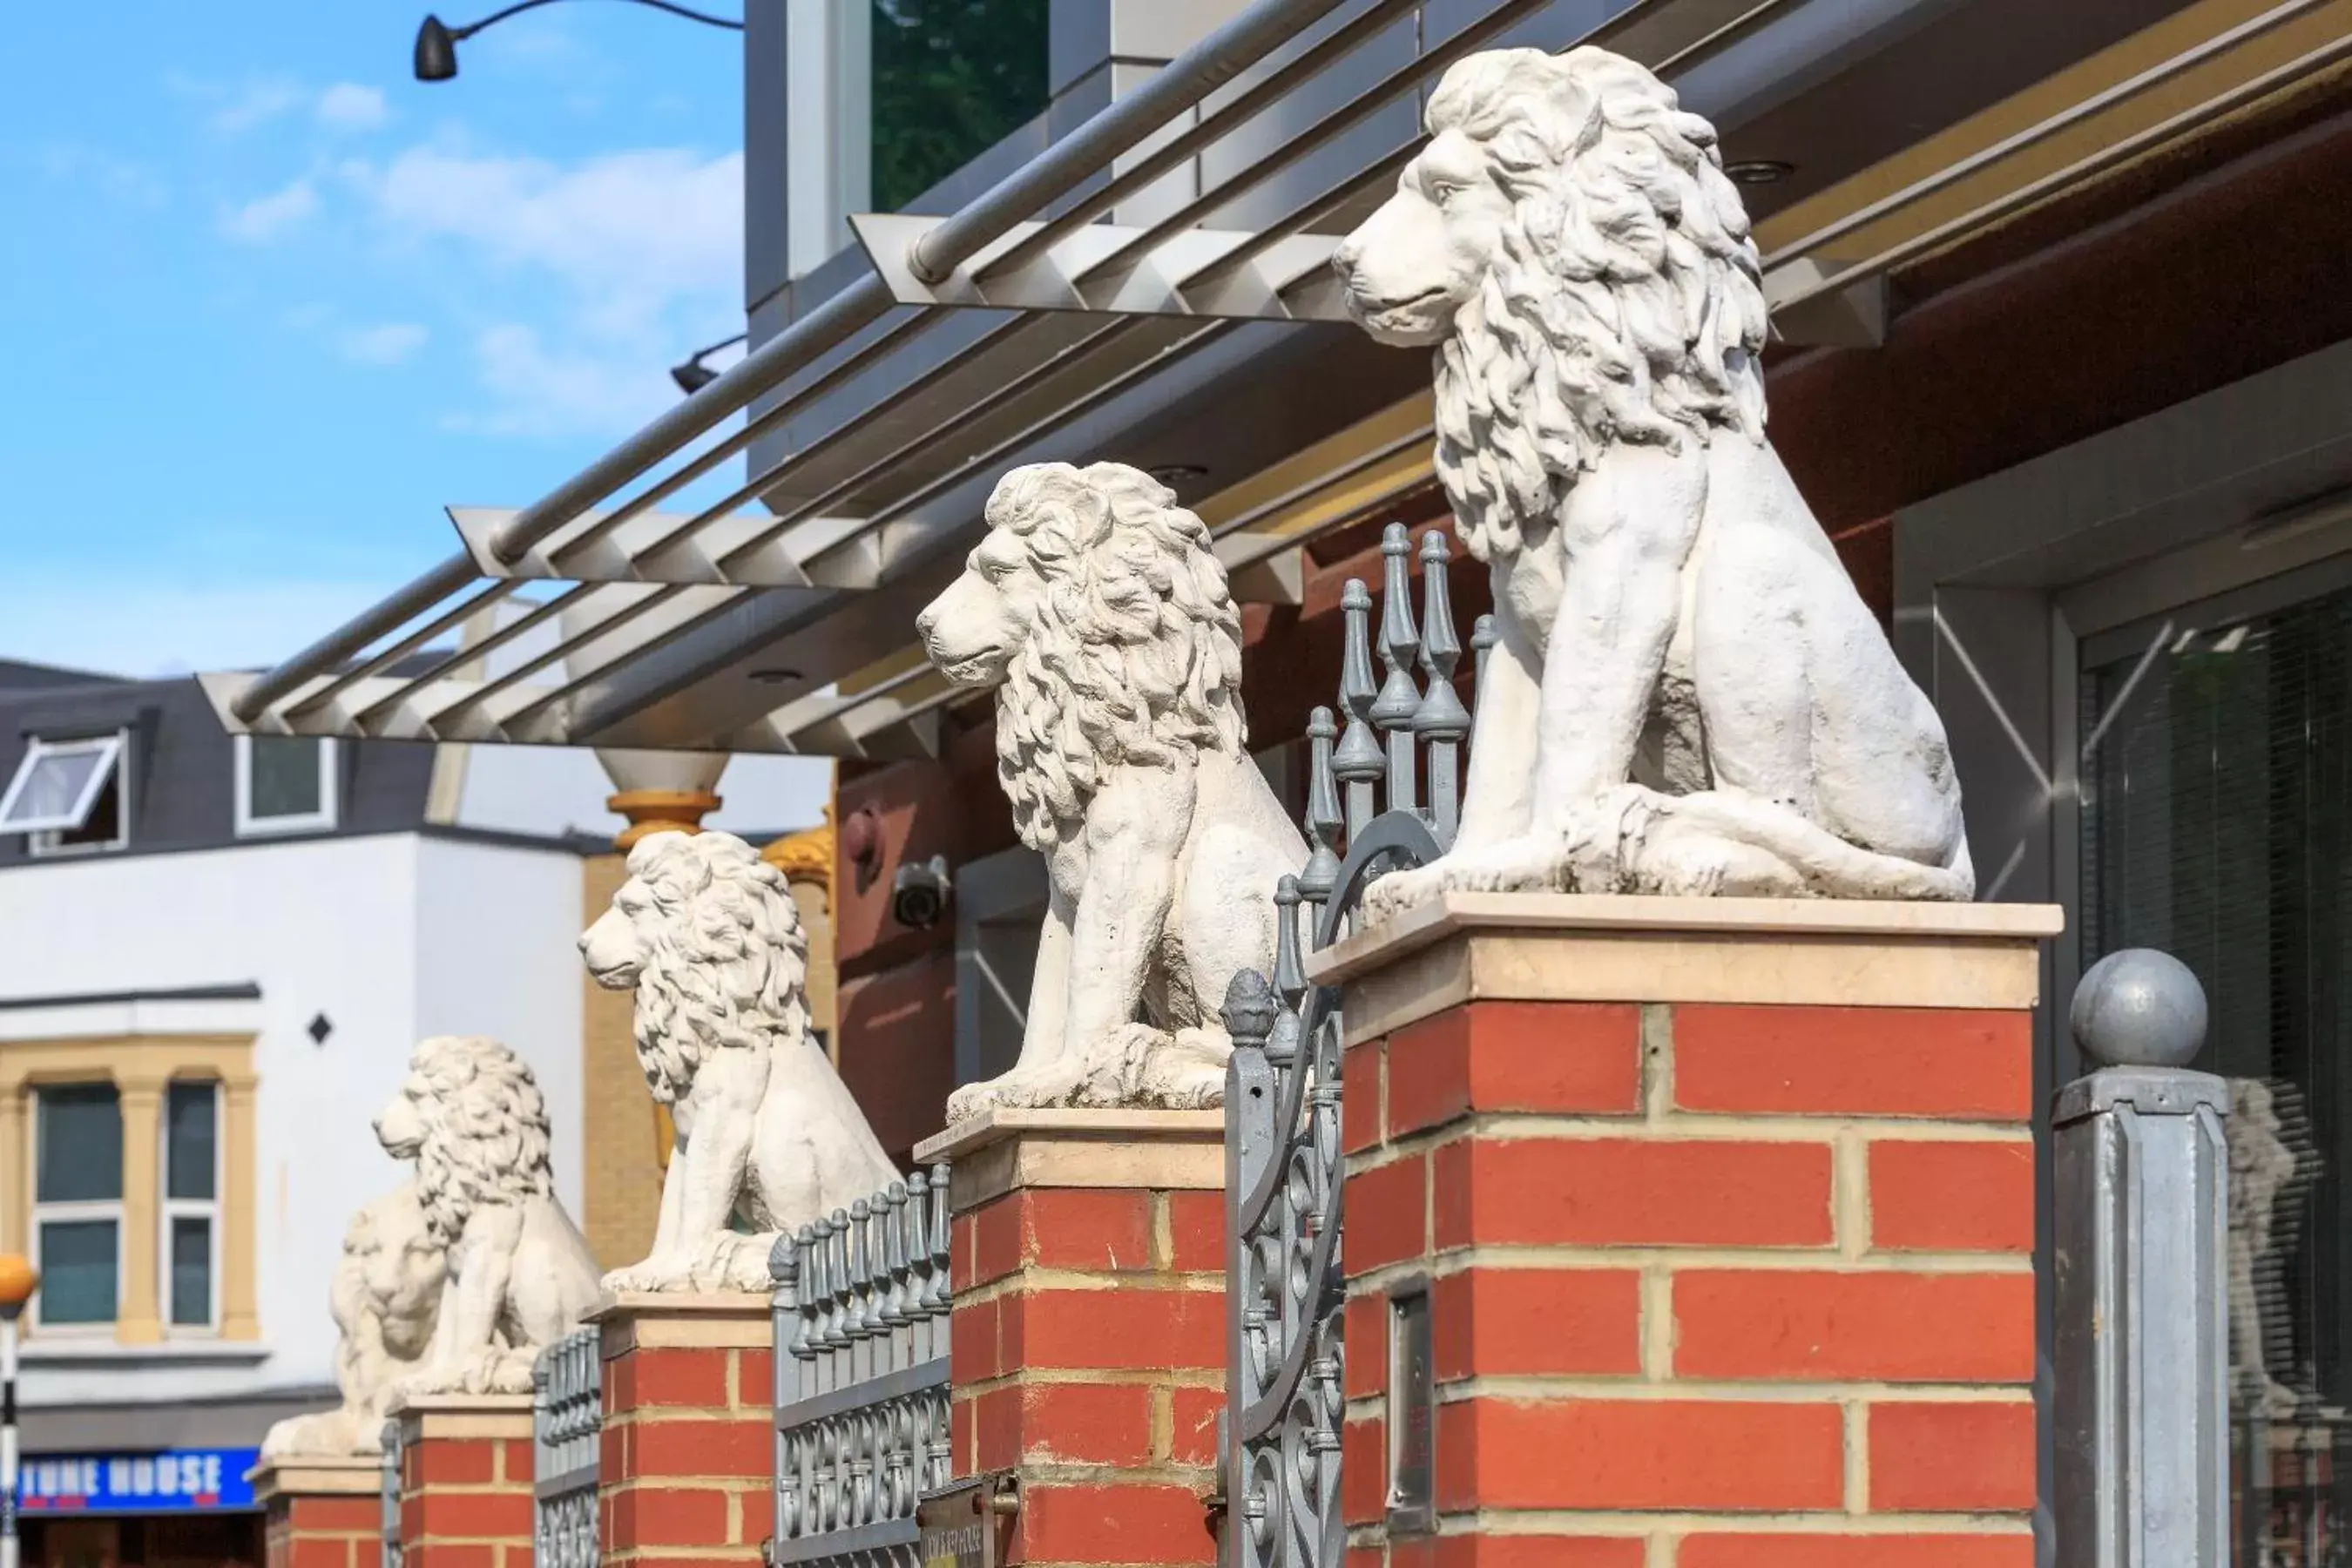 Decorative detail, Facade/Entrance in The Lion & Key Hotel